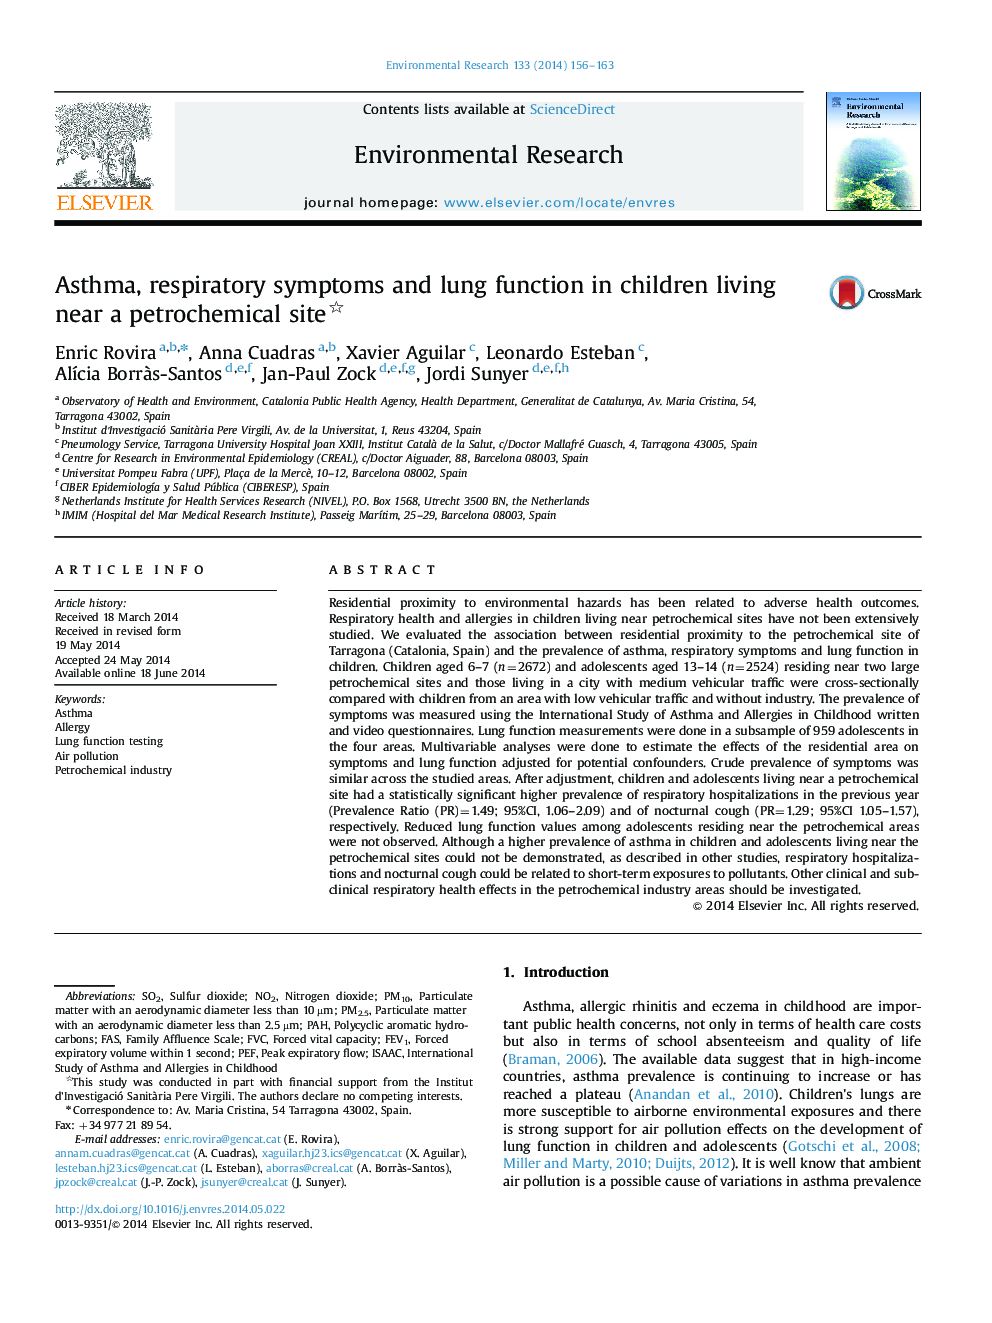 Asthma, respiratory symptoms and lung function in children living near a petrochemical site 